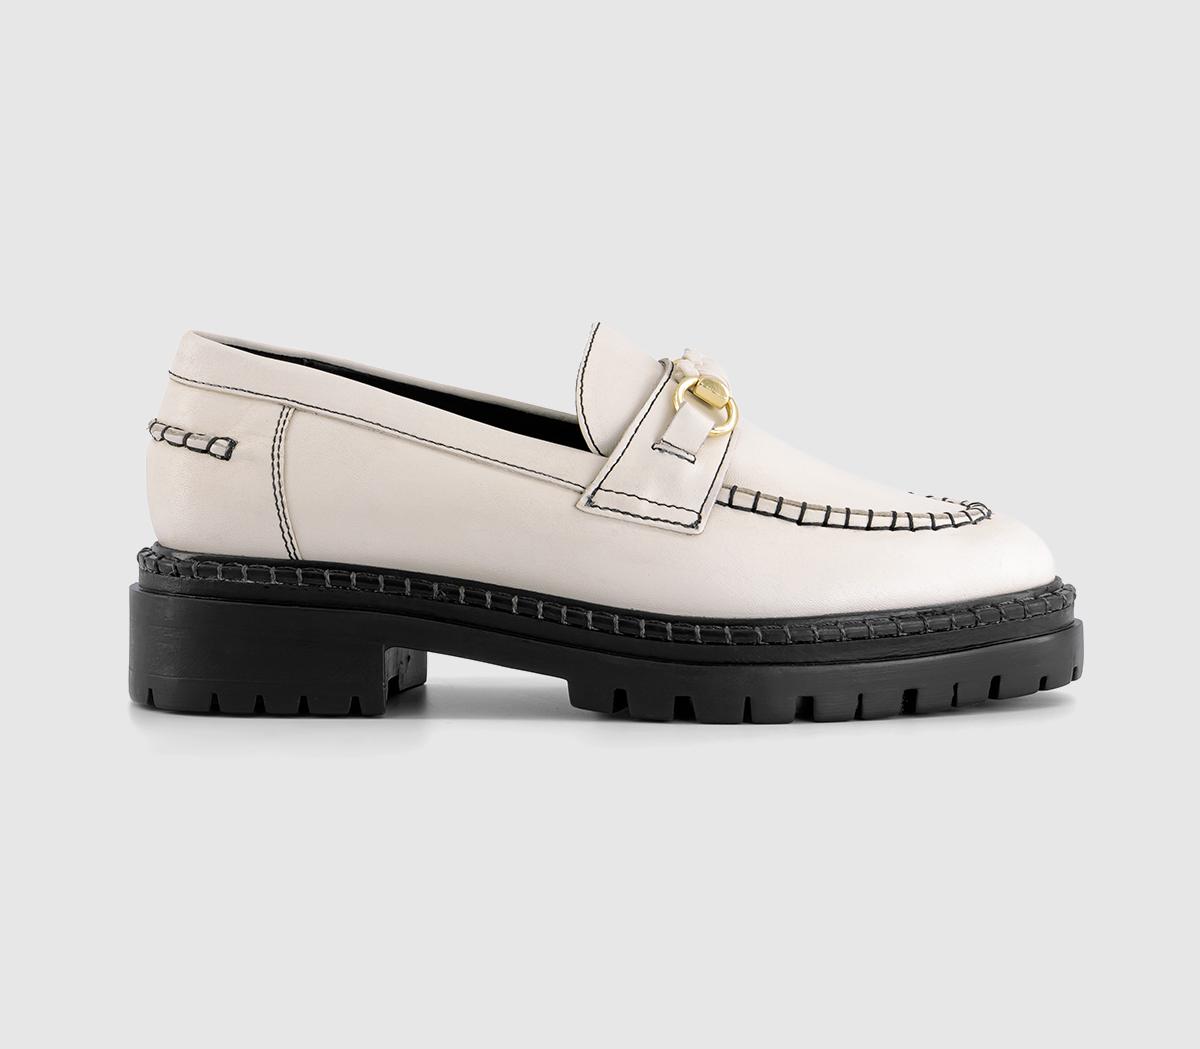 OFFICEFinchly Contrast Stitch LoafersOff White Leather